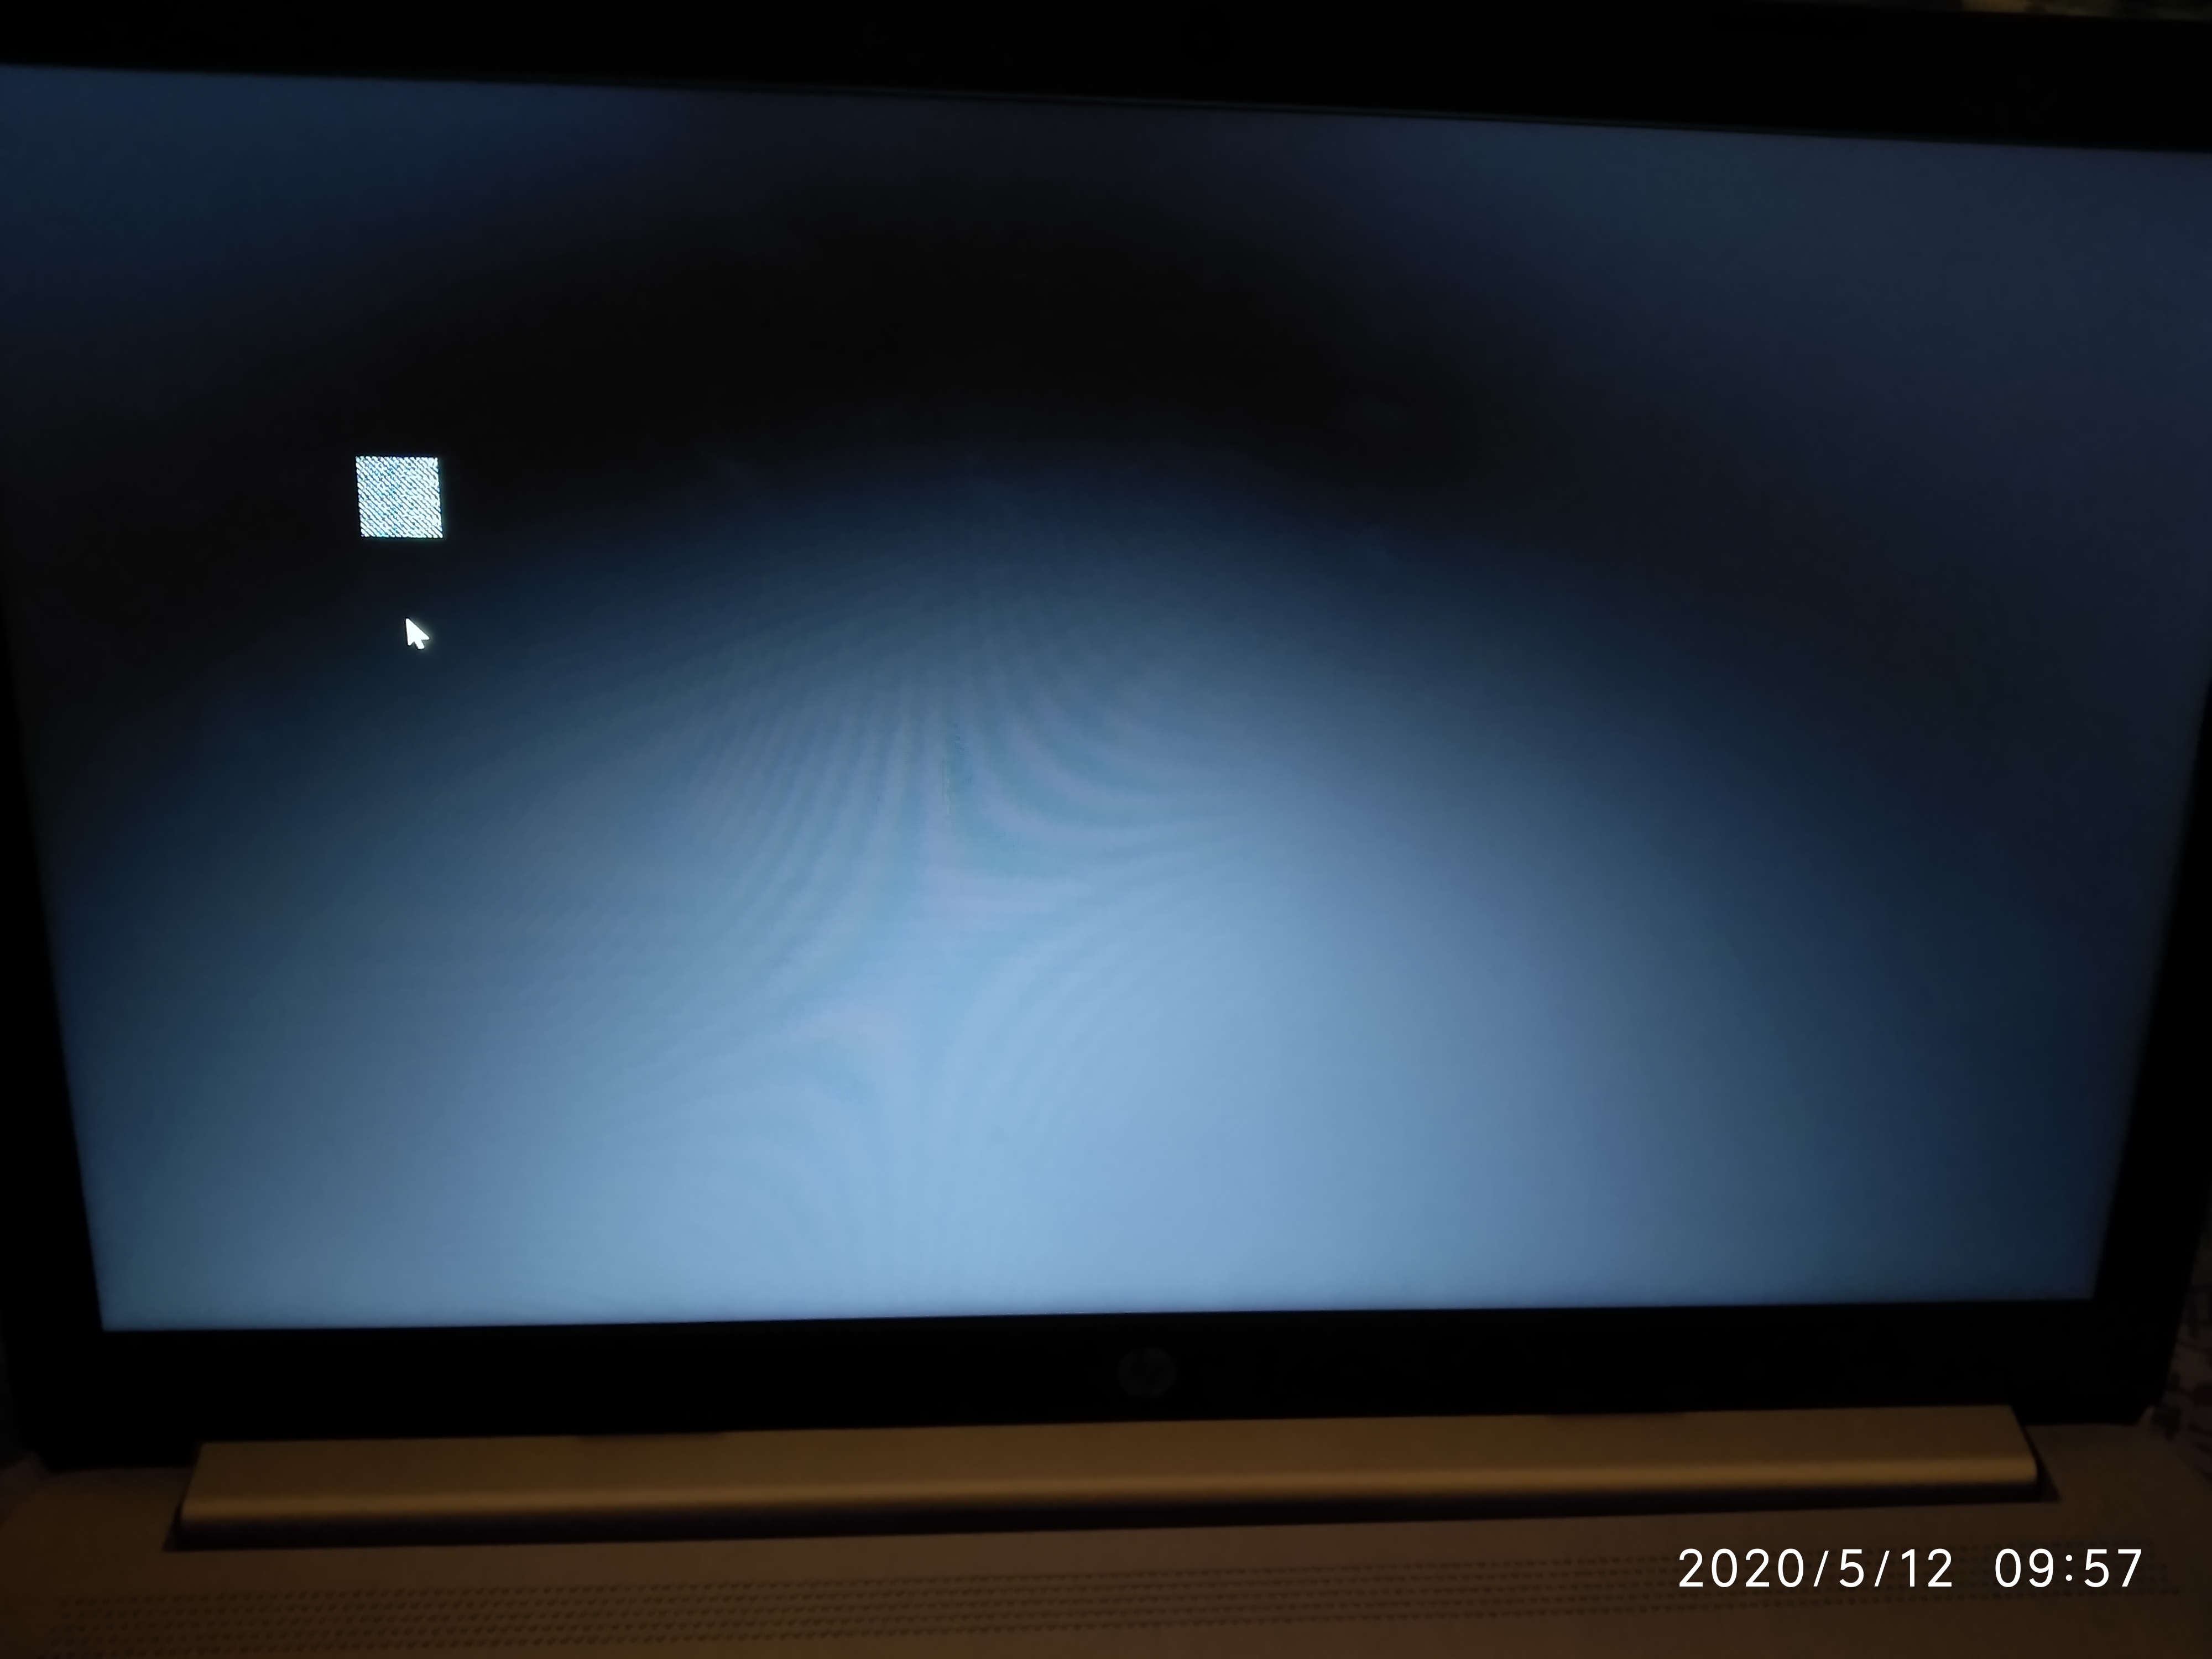 Display goes blank after HP logo completes loading - HP Support Community -  7601264